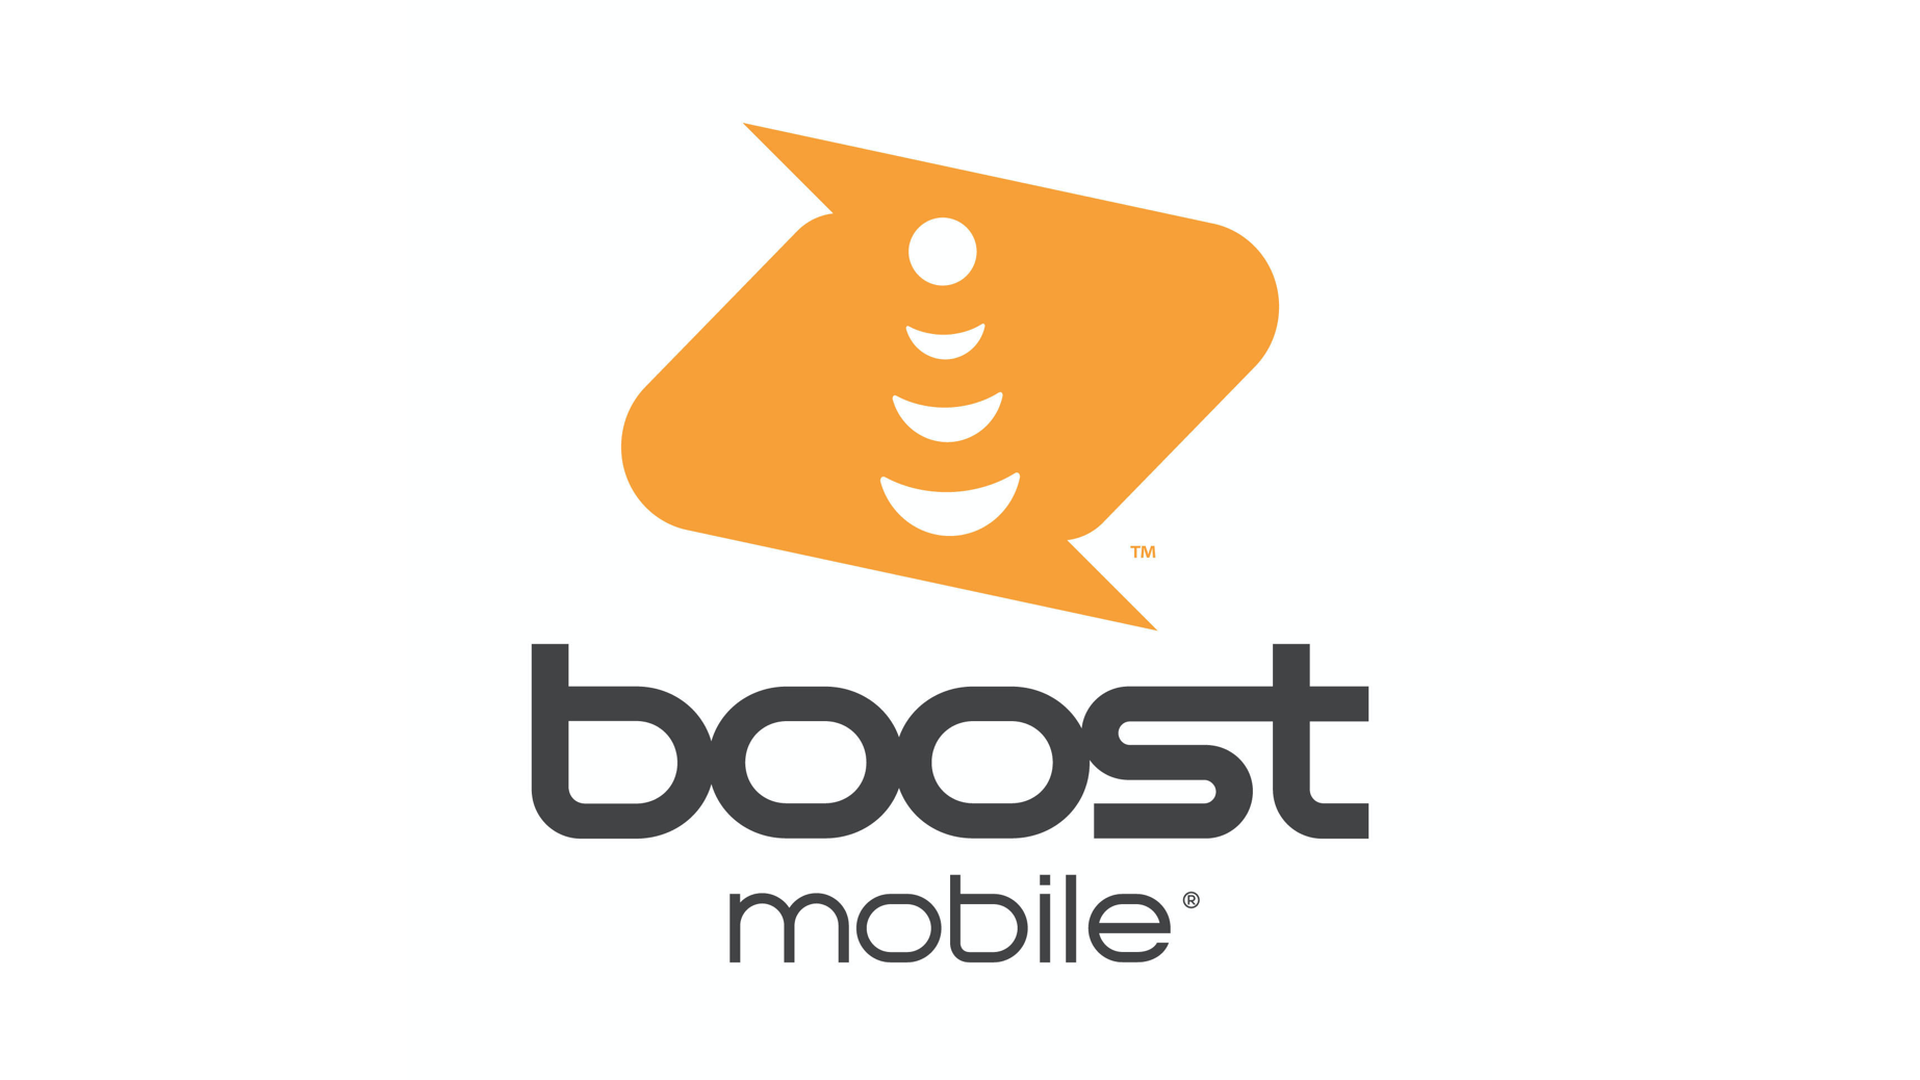 The news Boost Mobile logo